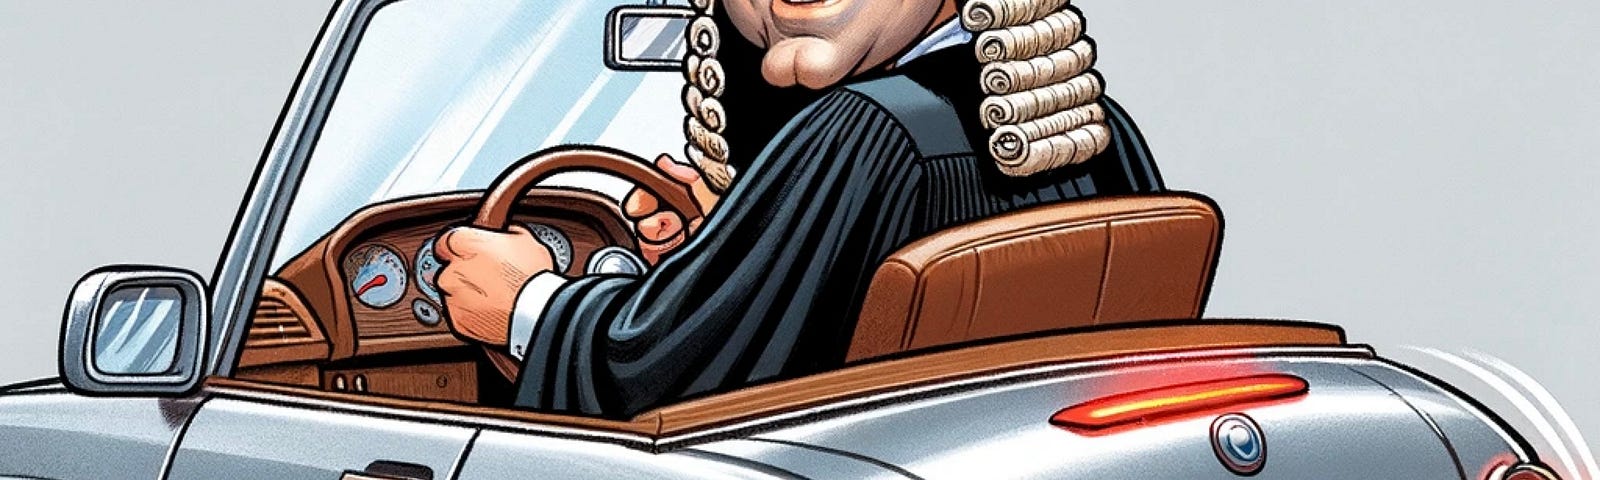 IMAGE: A cartoon illustration of a judge driving a car in reverse, complete with the traditional robe and wig, while the Telegram paper plane logo flies around